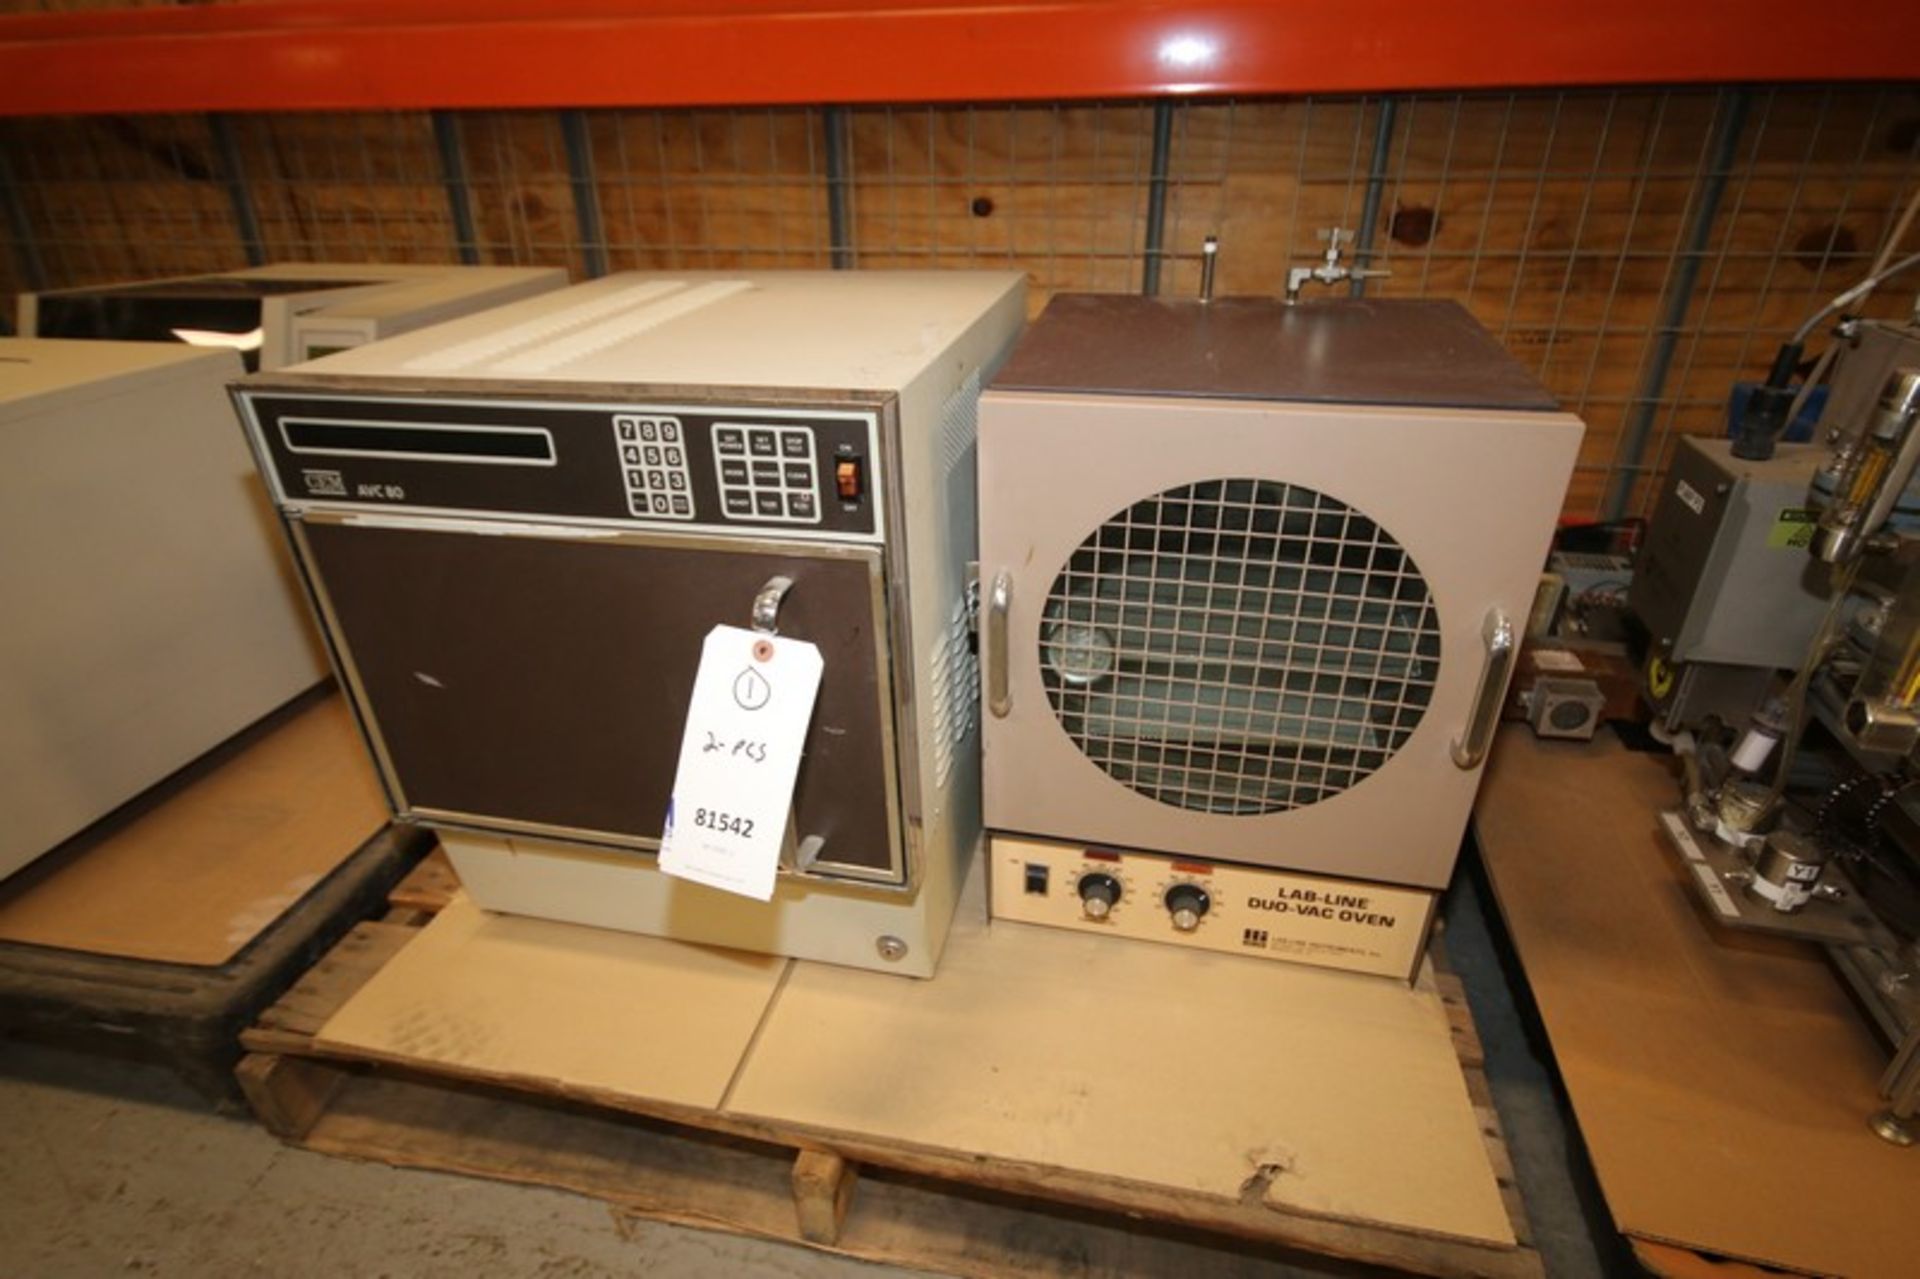 2 - Pcs - CEM AVC 80 Lab Microwave with Lab-Line Duo - Vac Oven Model 3620ST (INV#81542)(Located @